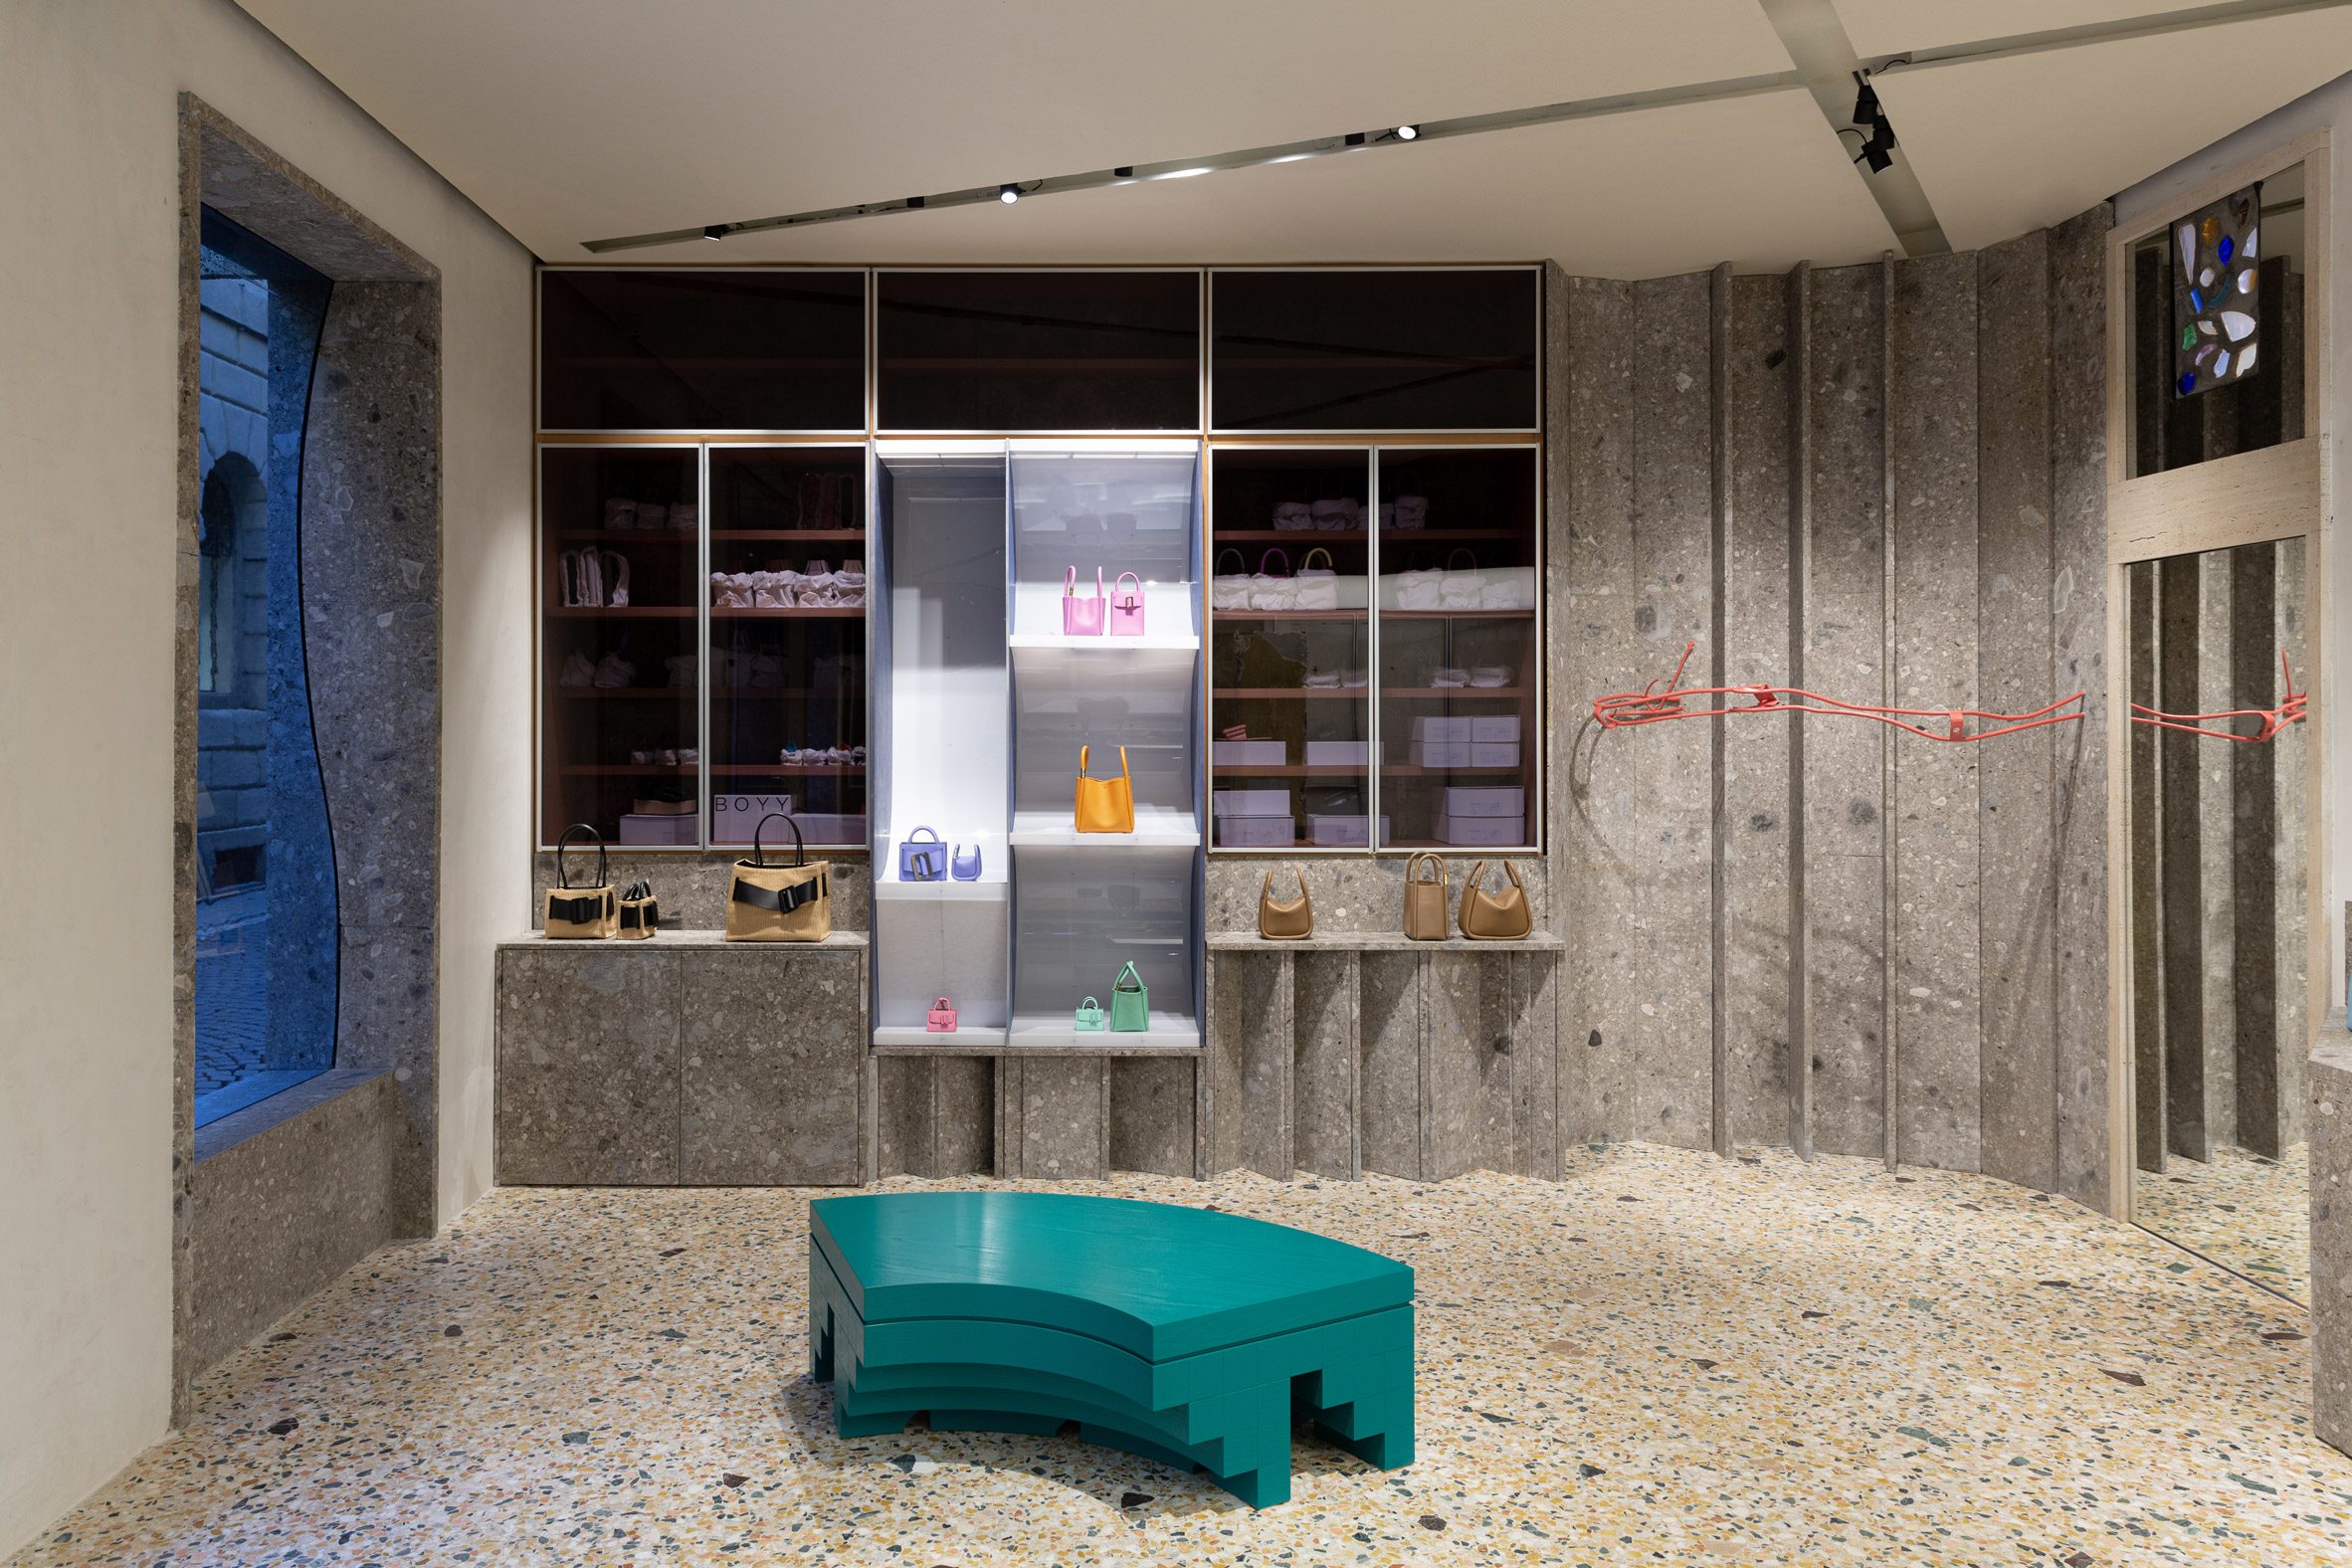 Interior of Boyy flagship store in Milan designed by FOS